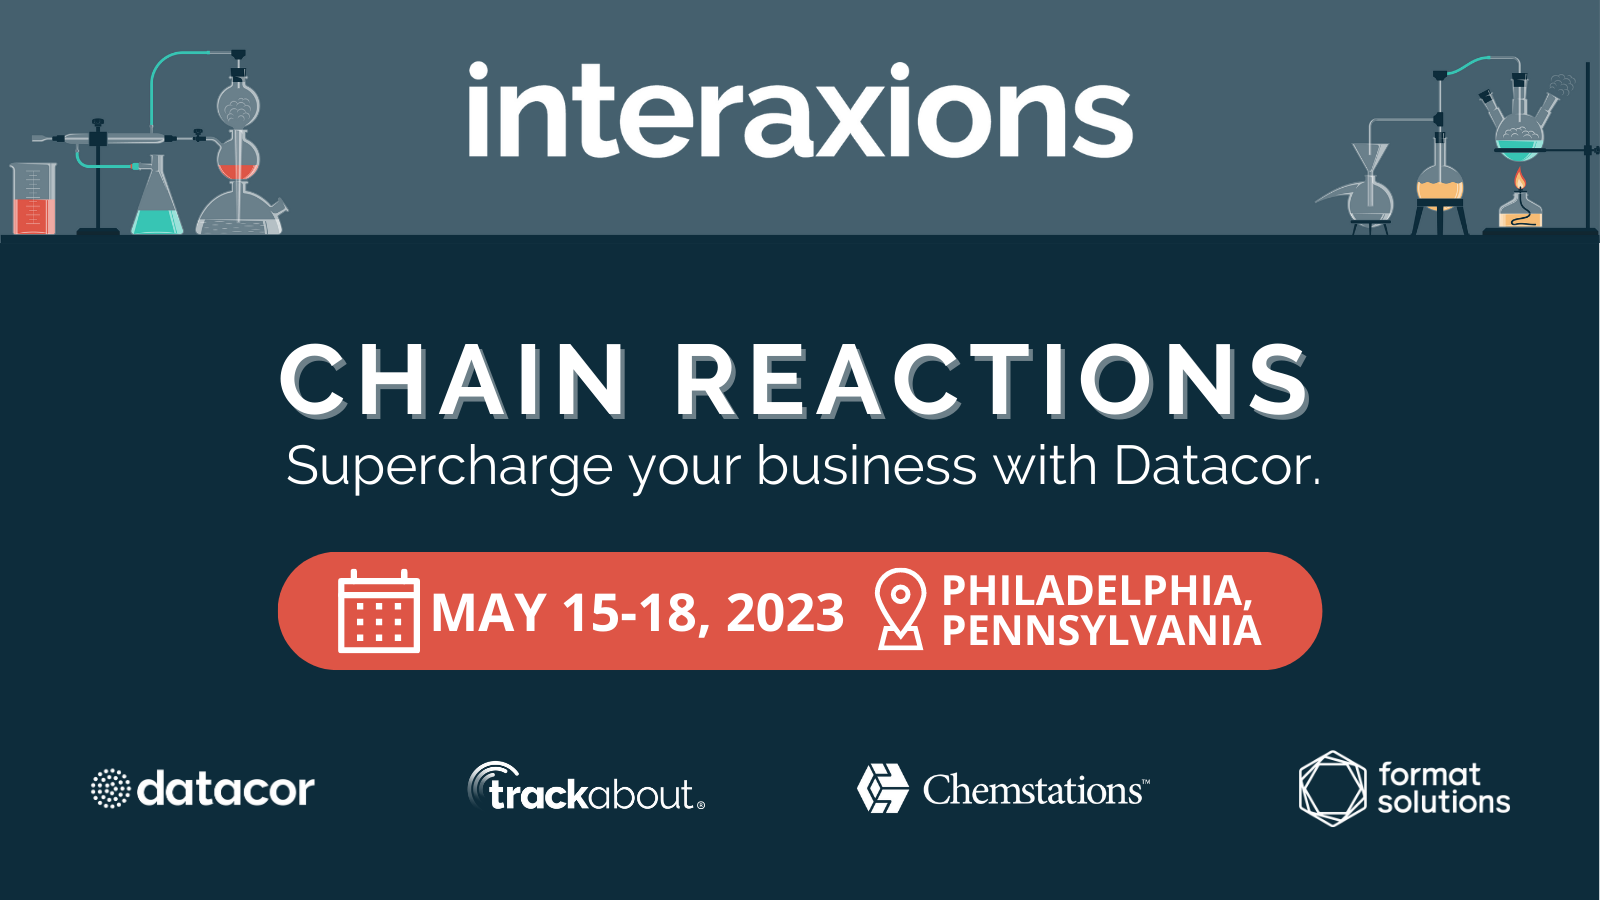 Interaxions 2023: Chain Reactions, Supercharge Your Business with Datacor